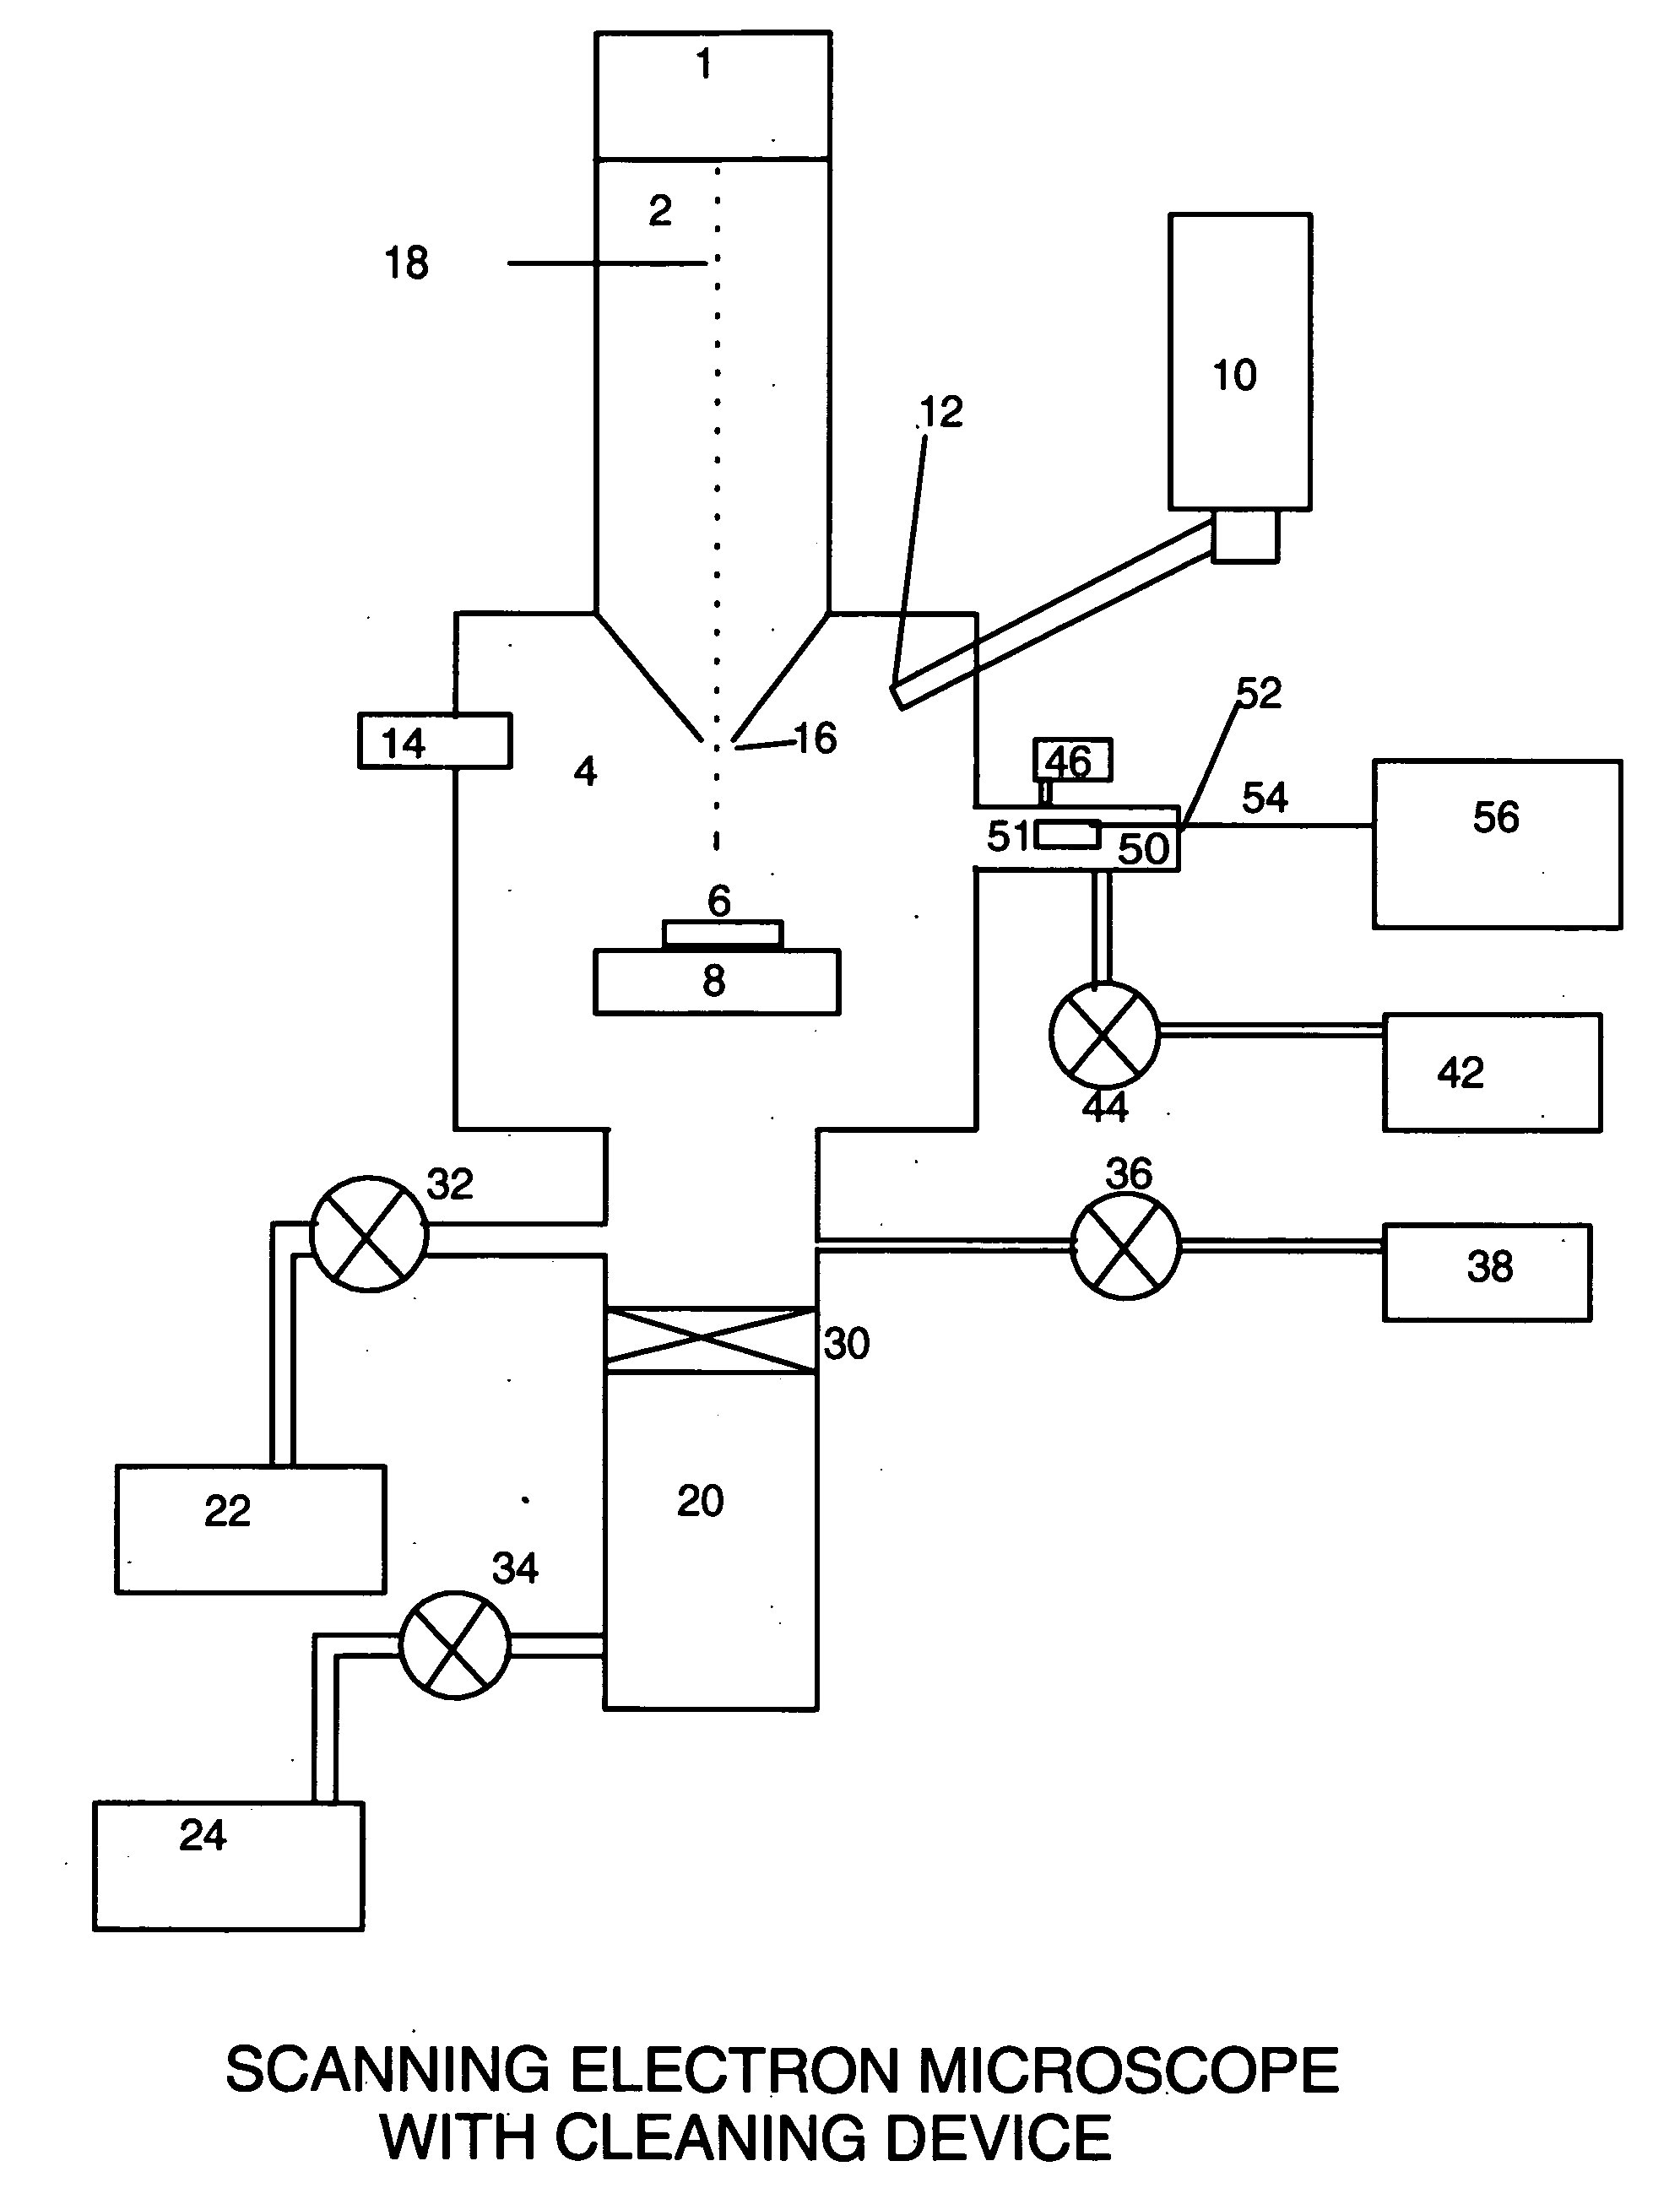 Oxidative cleaning method and apparatus for electron microscopes using UV excitation in a oxygen radical source